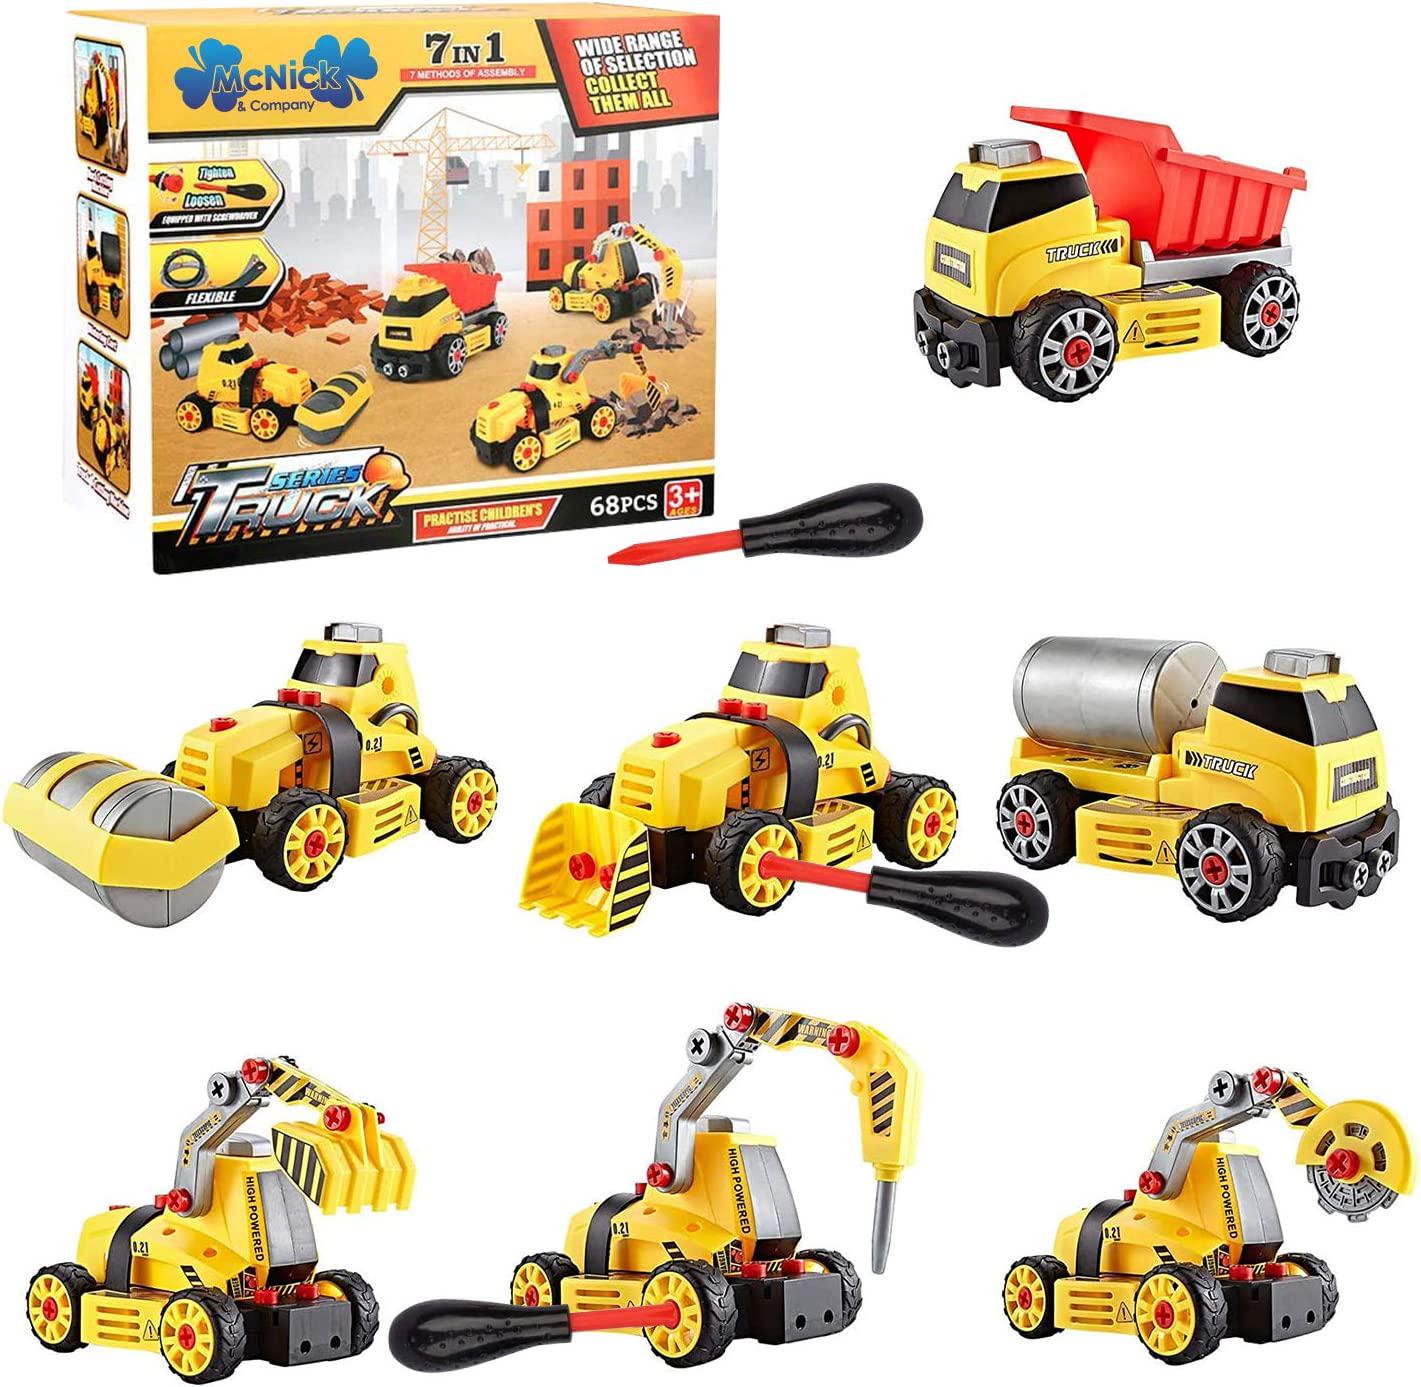 MCNICK & COMPANY, Kids Educational Building Learning Engineering Construction Toys Set - Front Loader, Excavator, Dump Truck